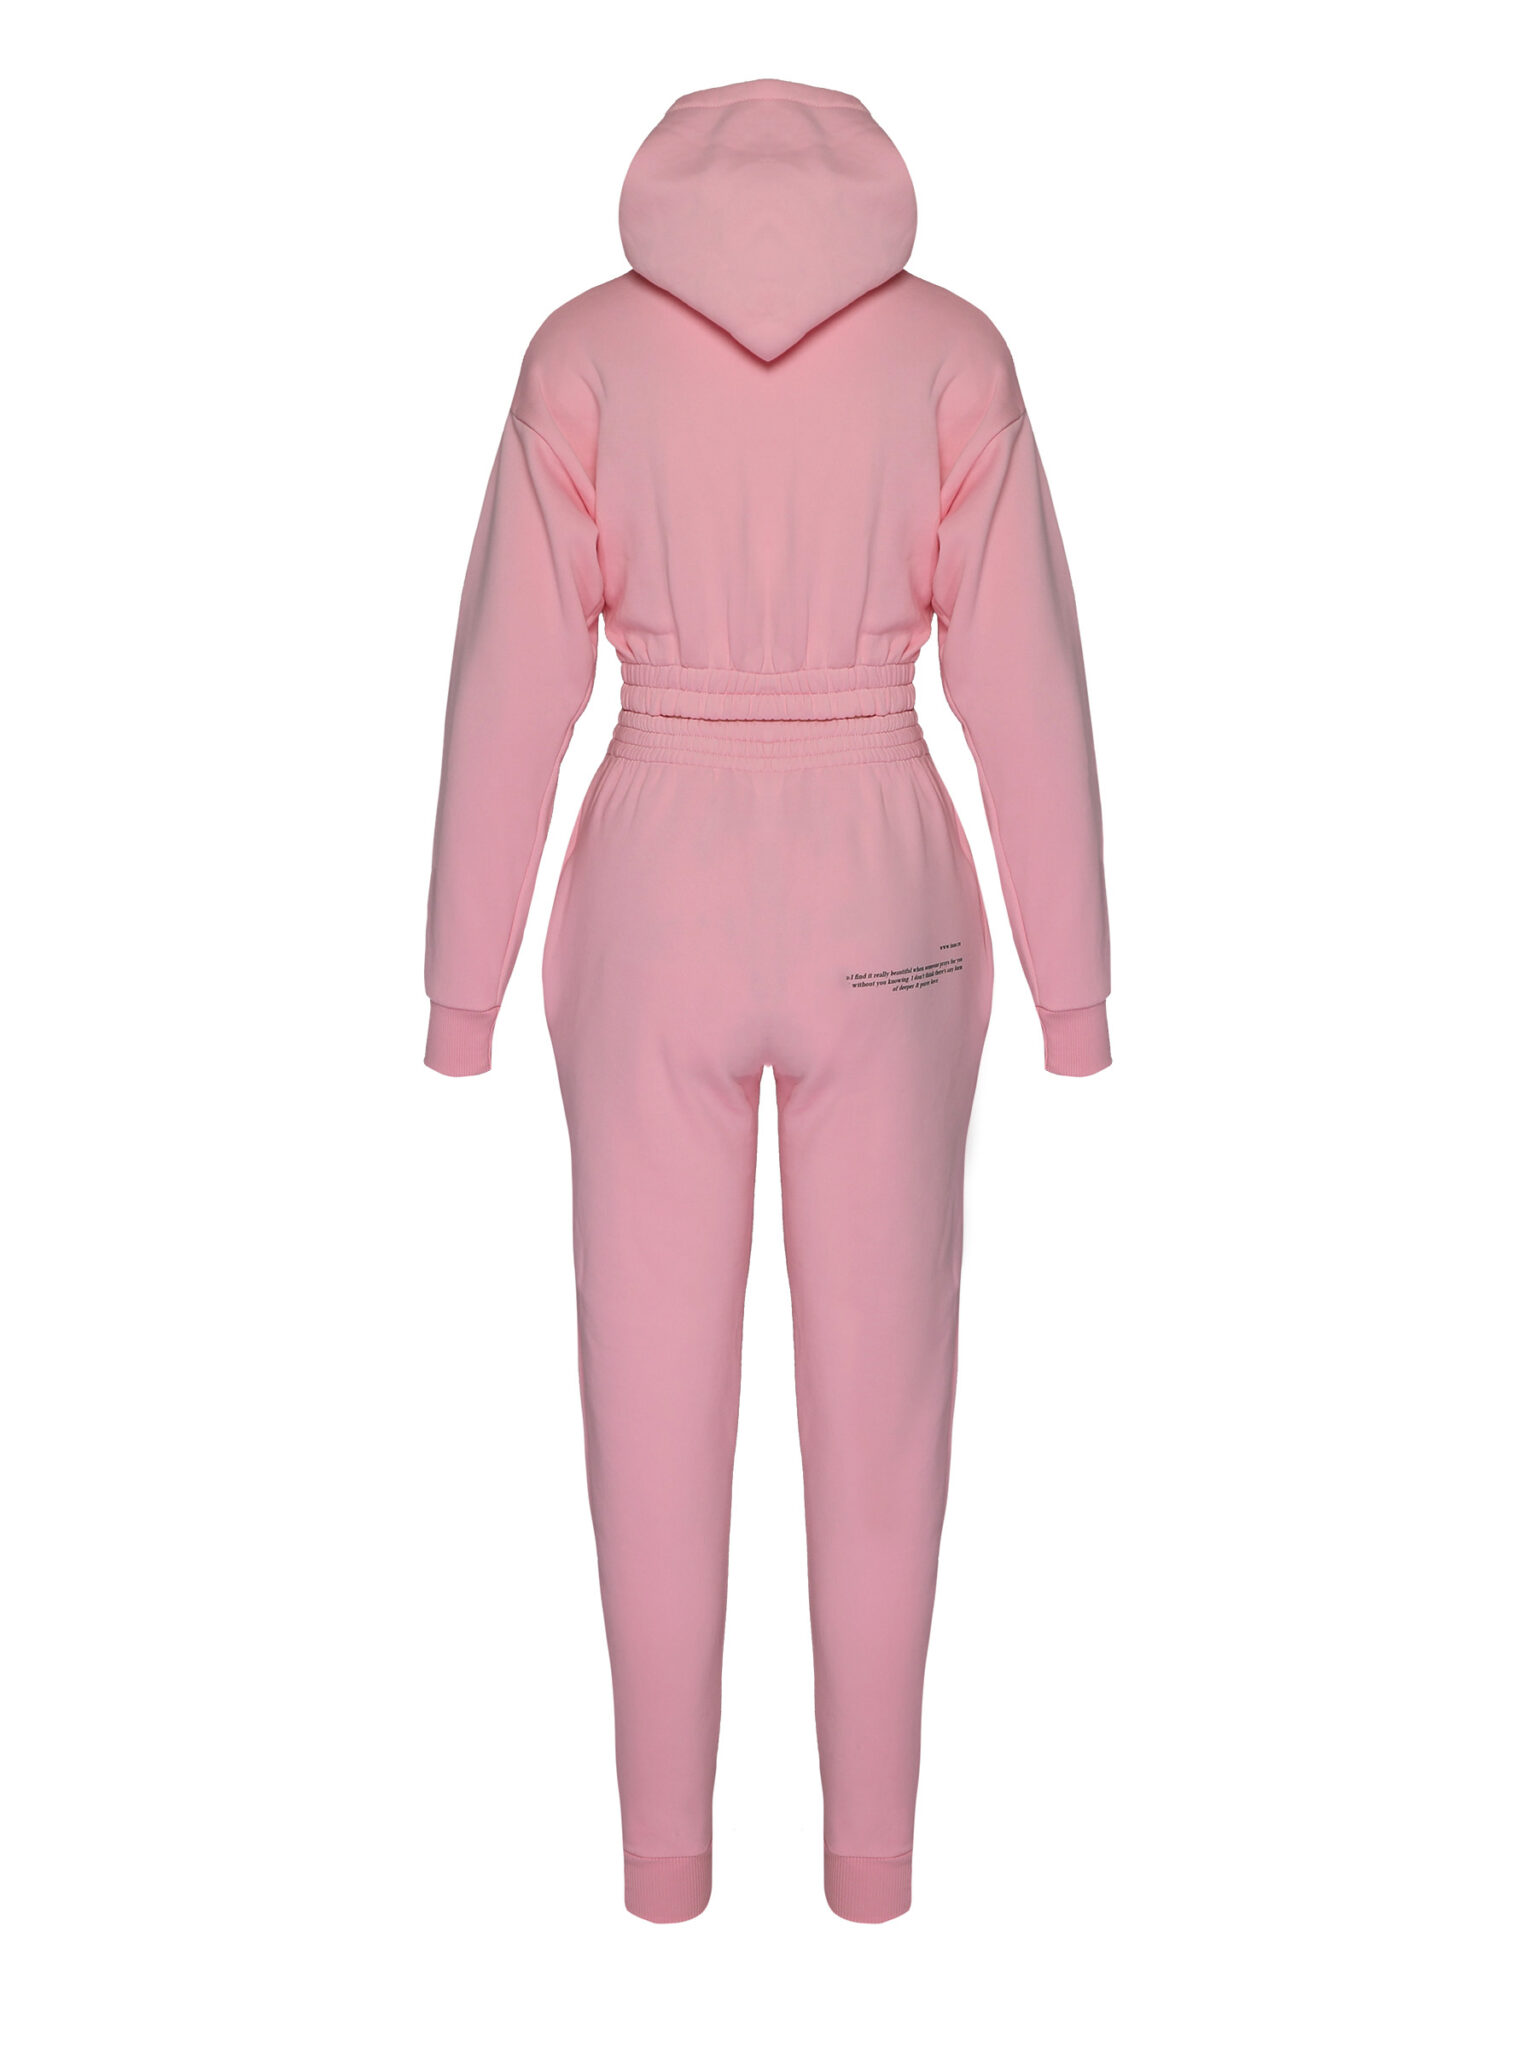 Short Royal Pink Hoodie + Trousers Set - ISSO